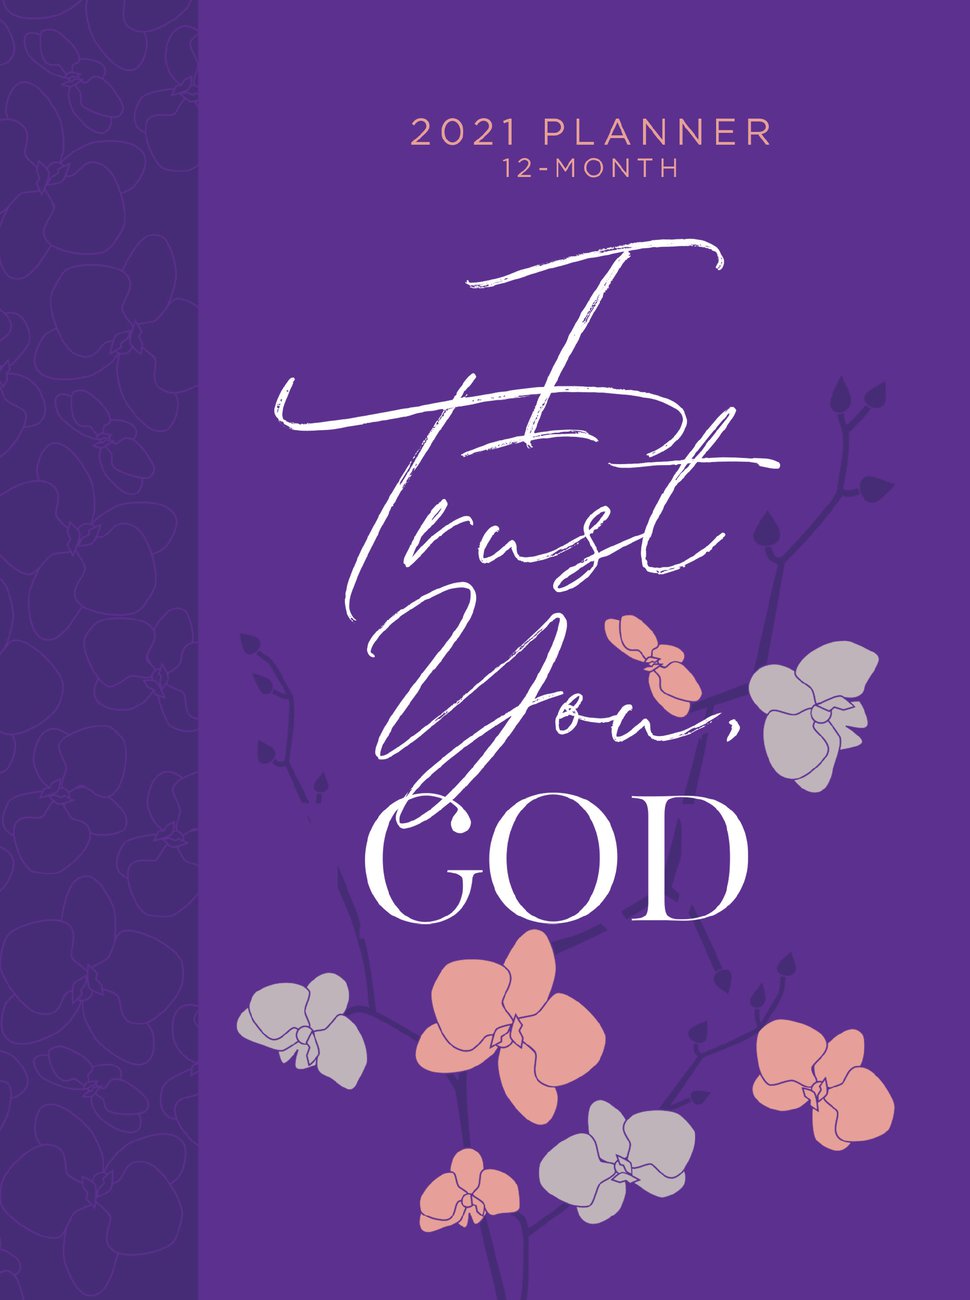 Image of 2021 12-Month Planner: I Trust You God other